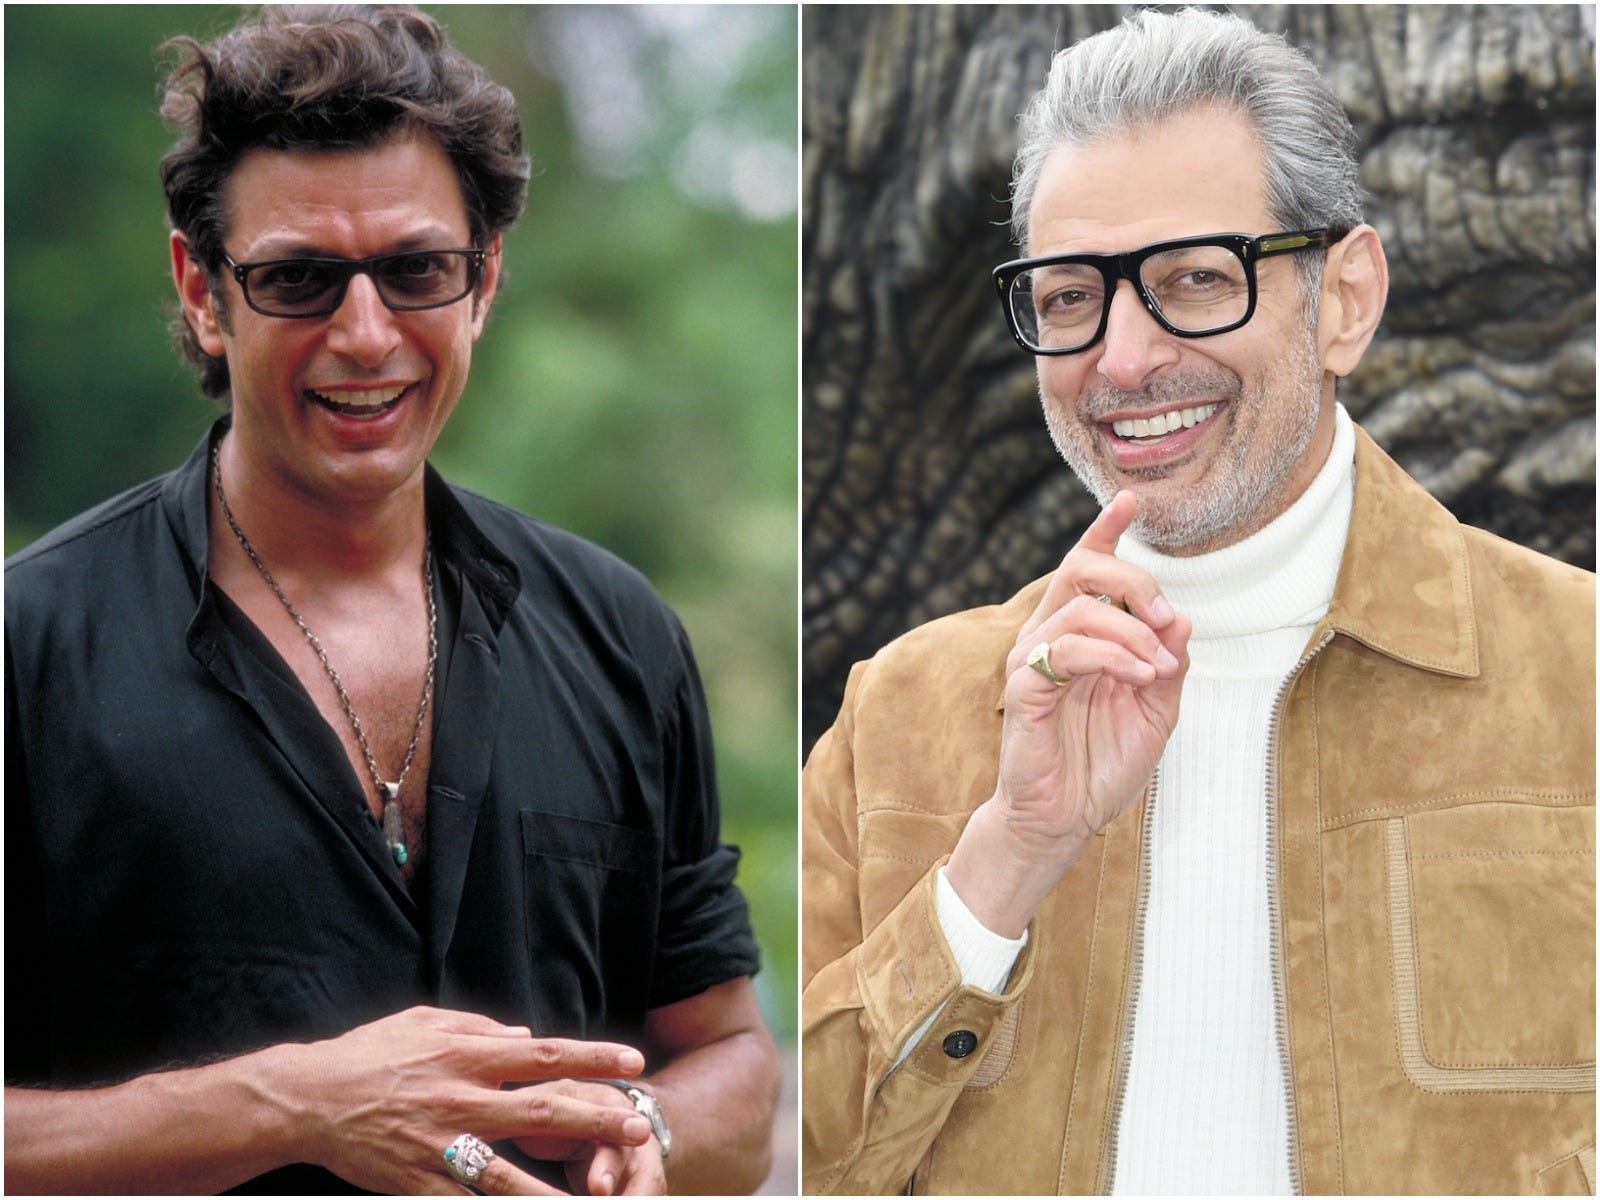 Jeff Goldblum thanked fans who took voting actions by recreating an iconic "Jurassic Park" scene.